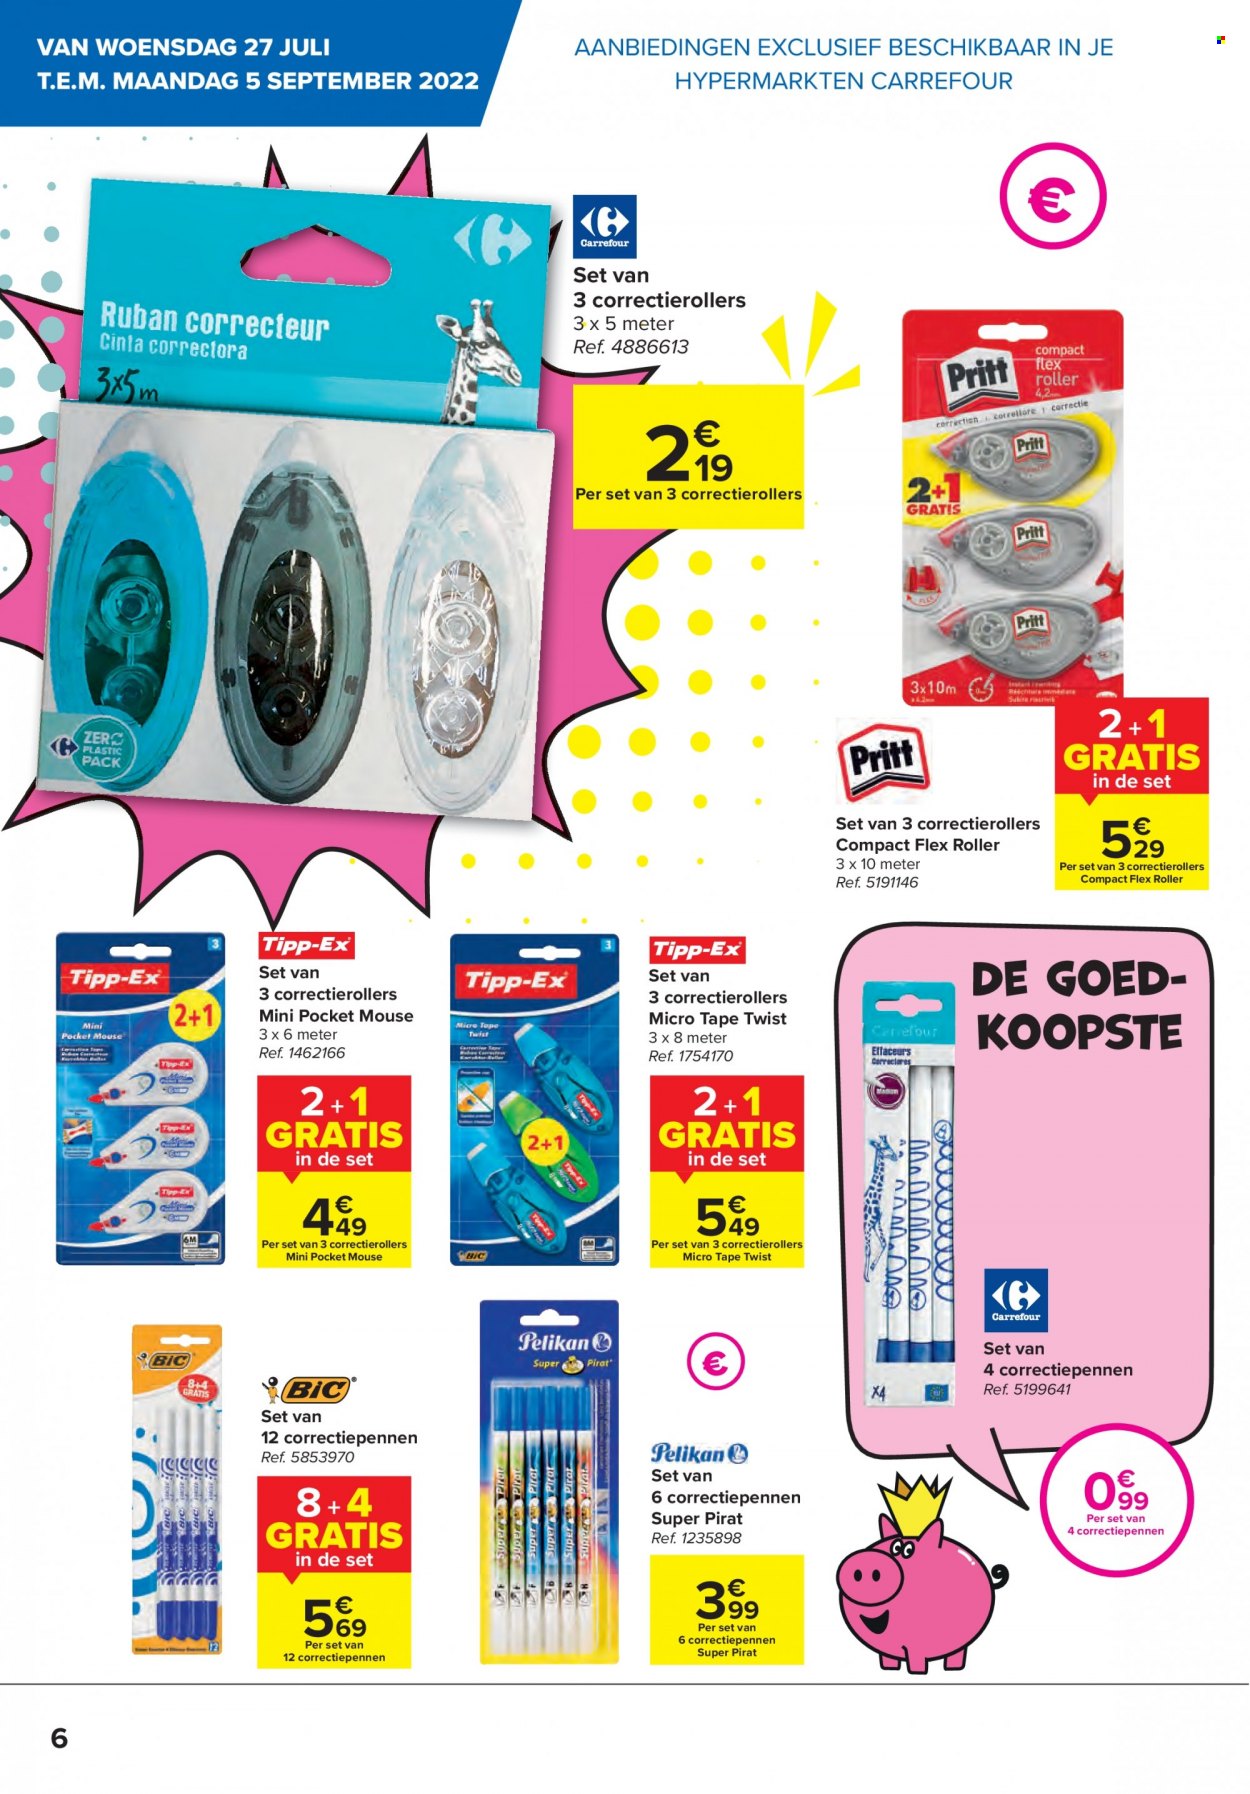 Catalogue Carrefour hypermarkt - 27.7.2022 - 5.9.2022. Page 6.